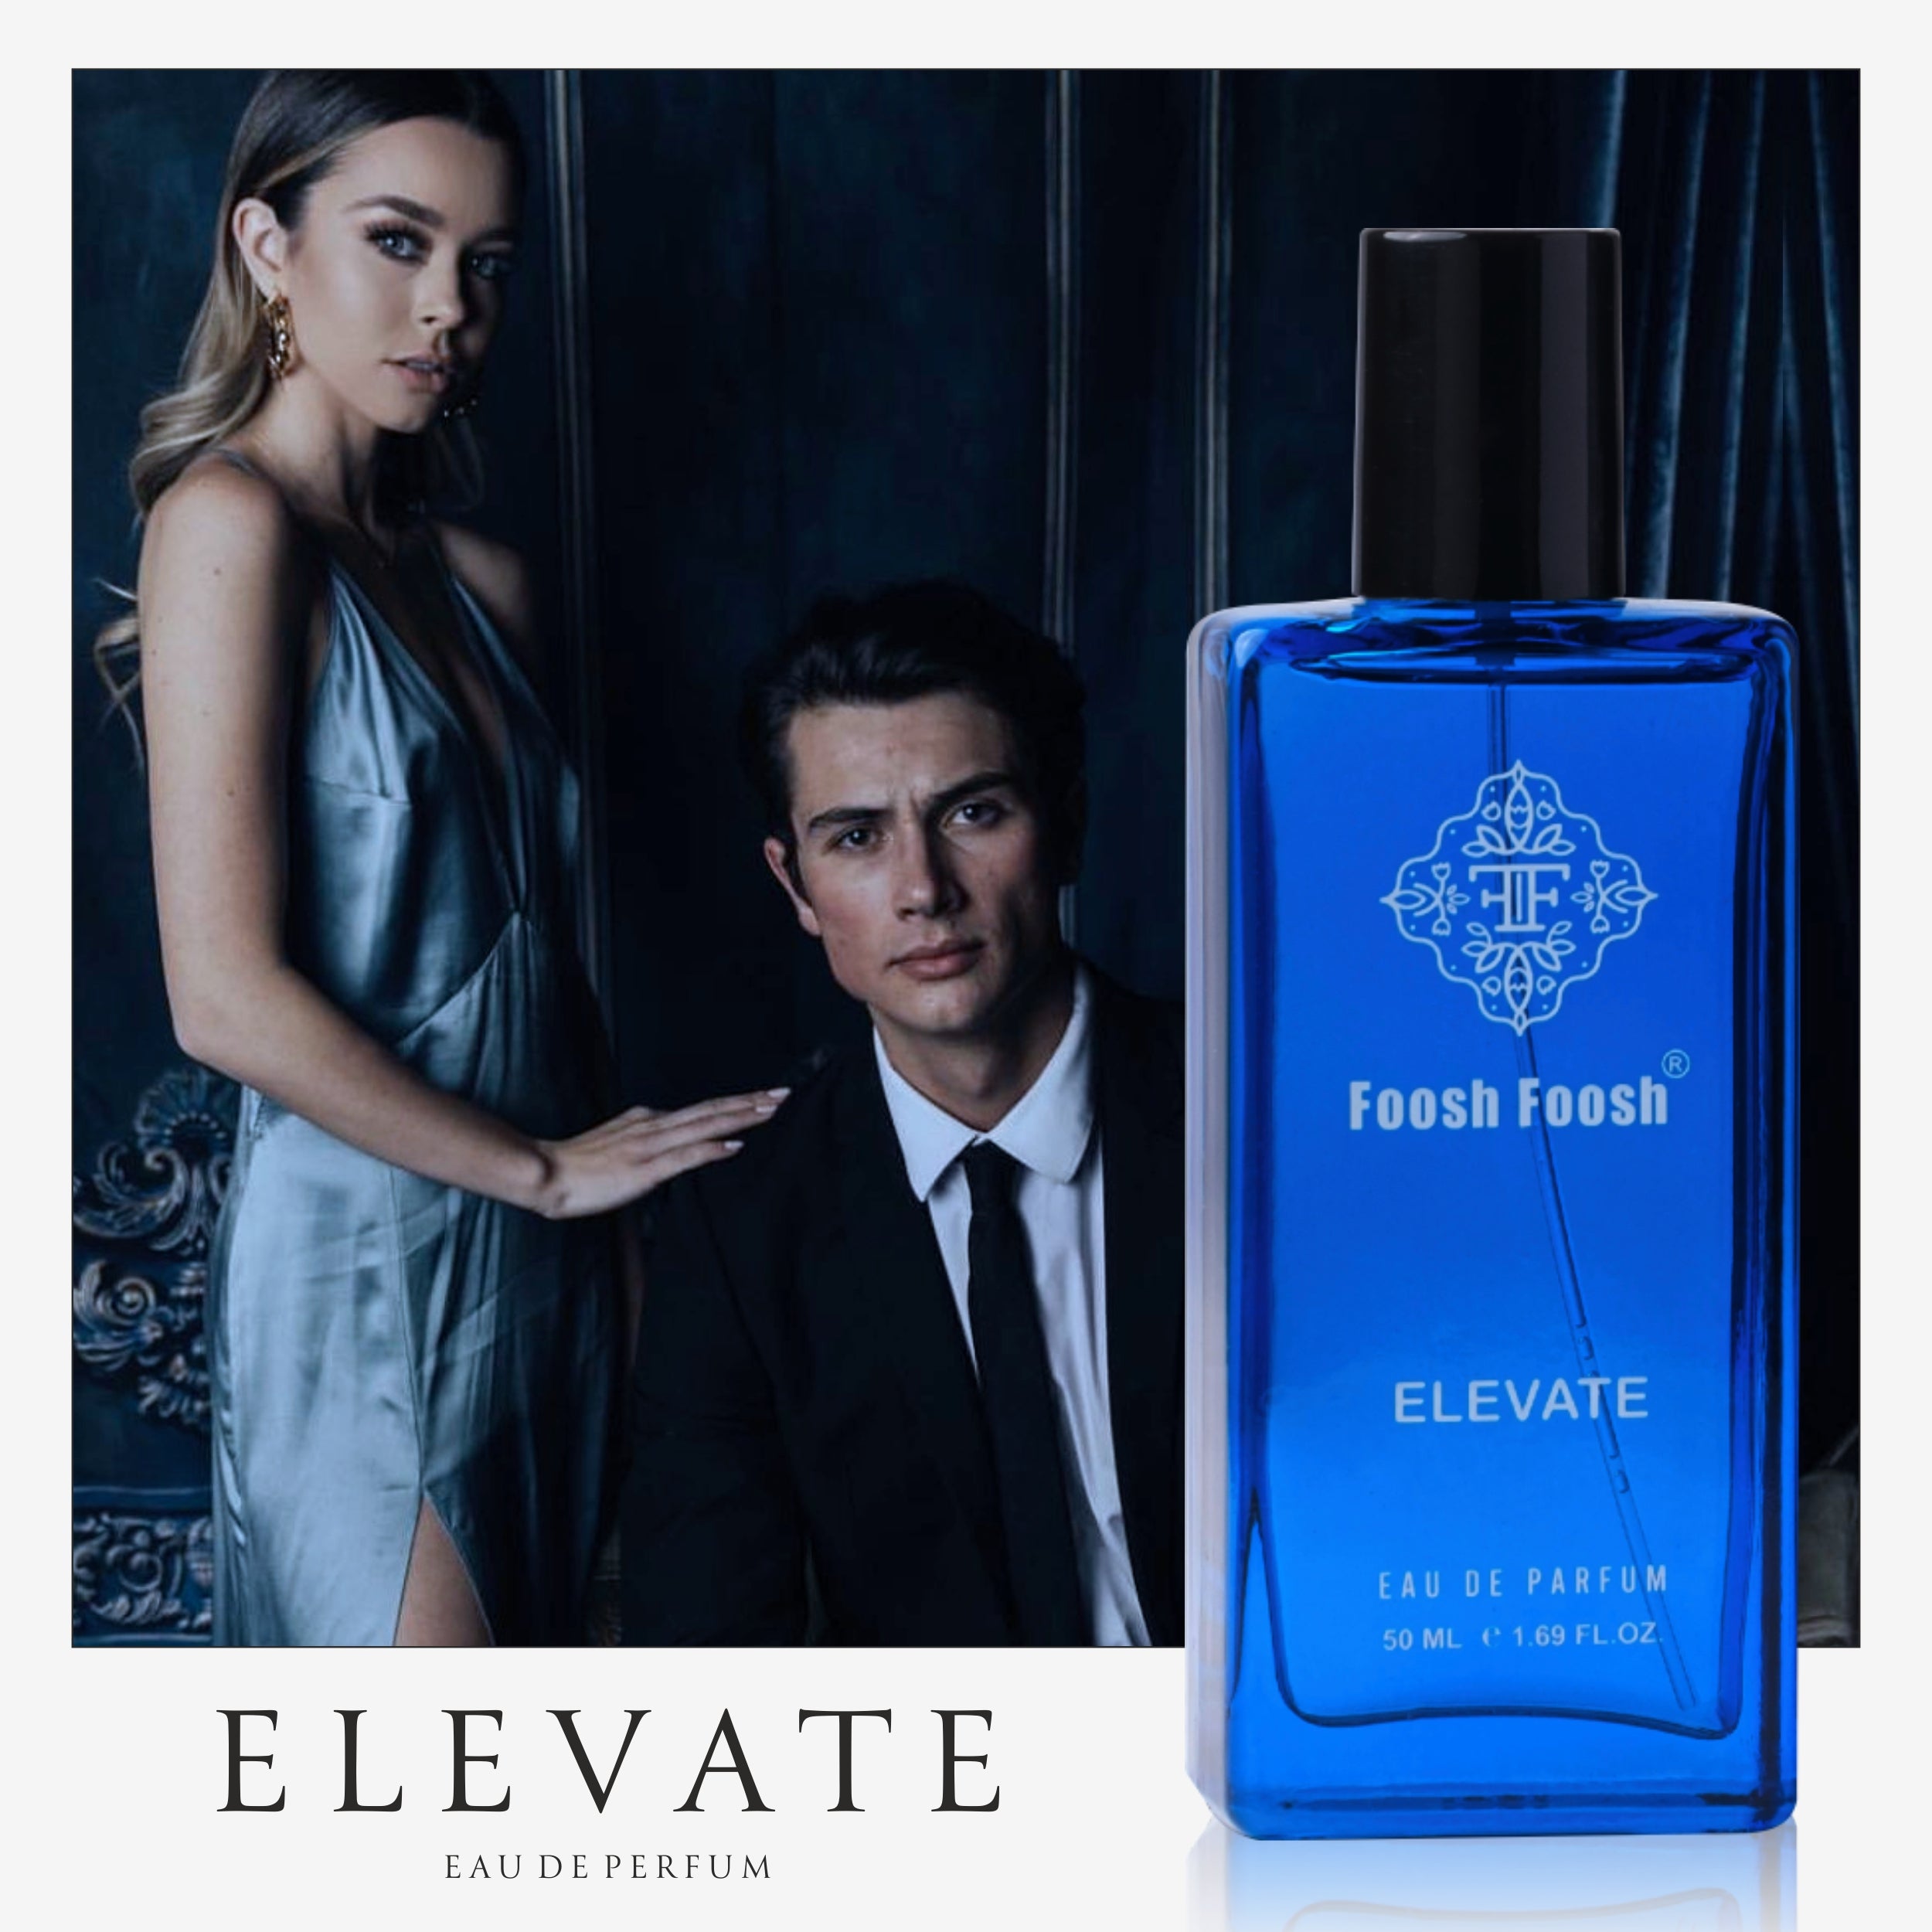 Elevate Luxury Perfume - 50ml | Strong and Long Lasting |